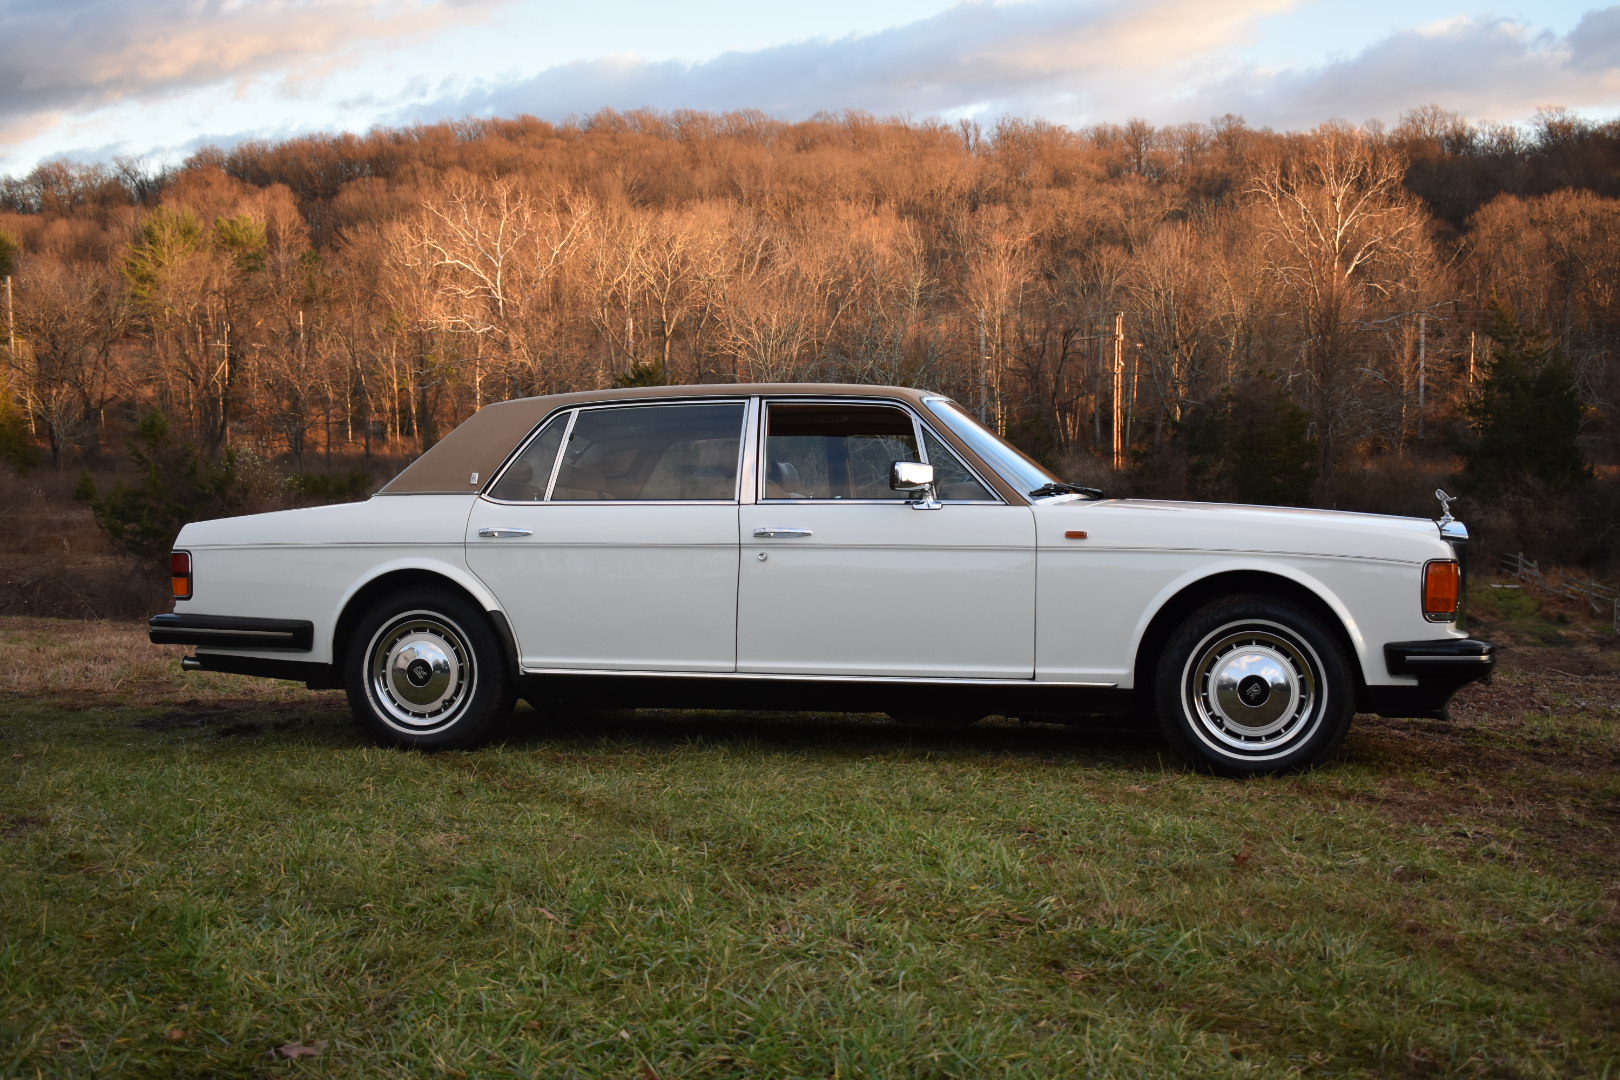 RollsRoyce Silver Spirit  Silver Spur buyers guide what to pay and what  to look for  Classic  Sports Car